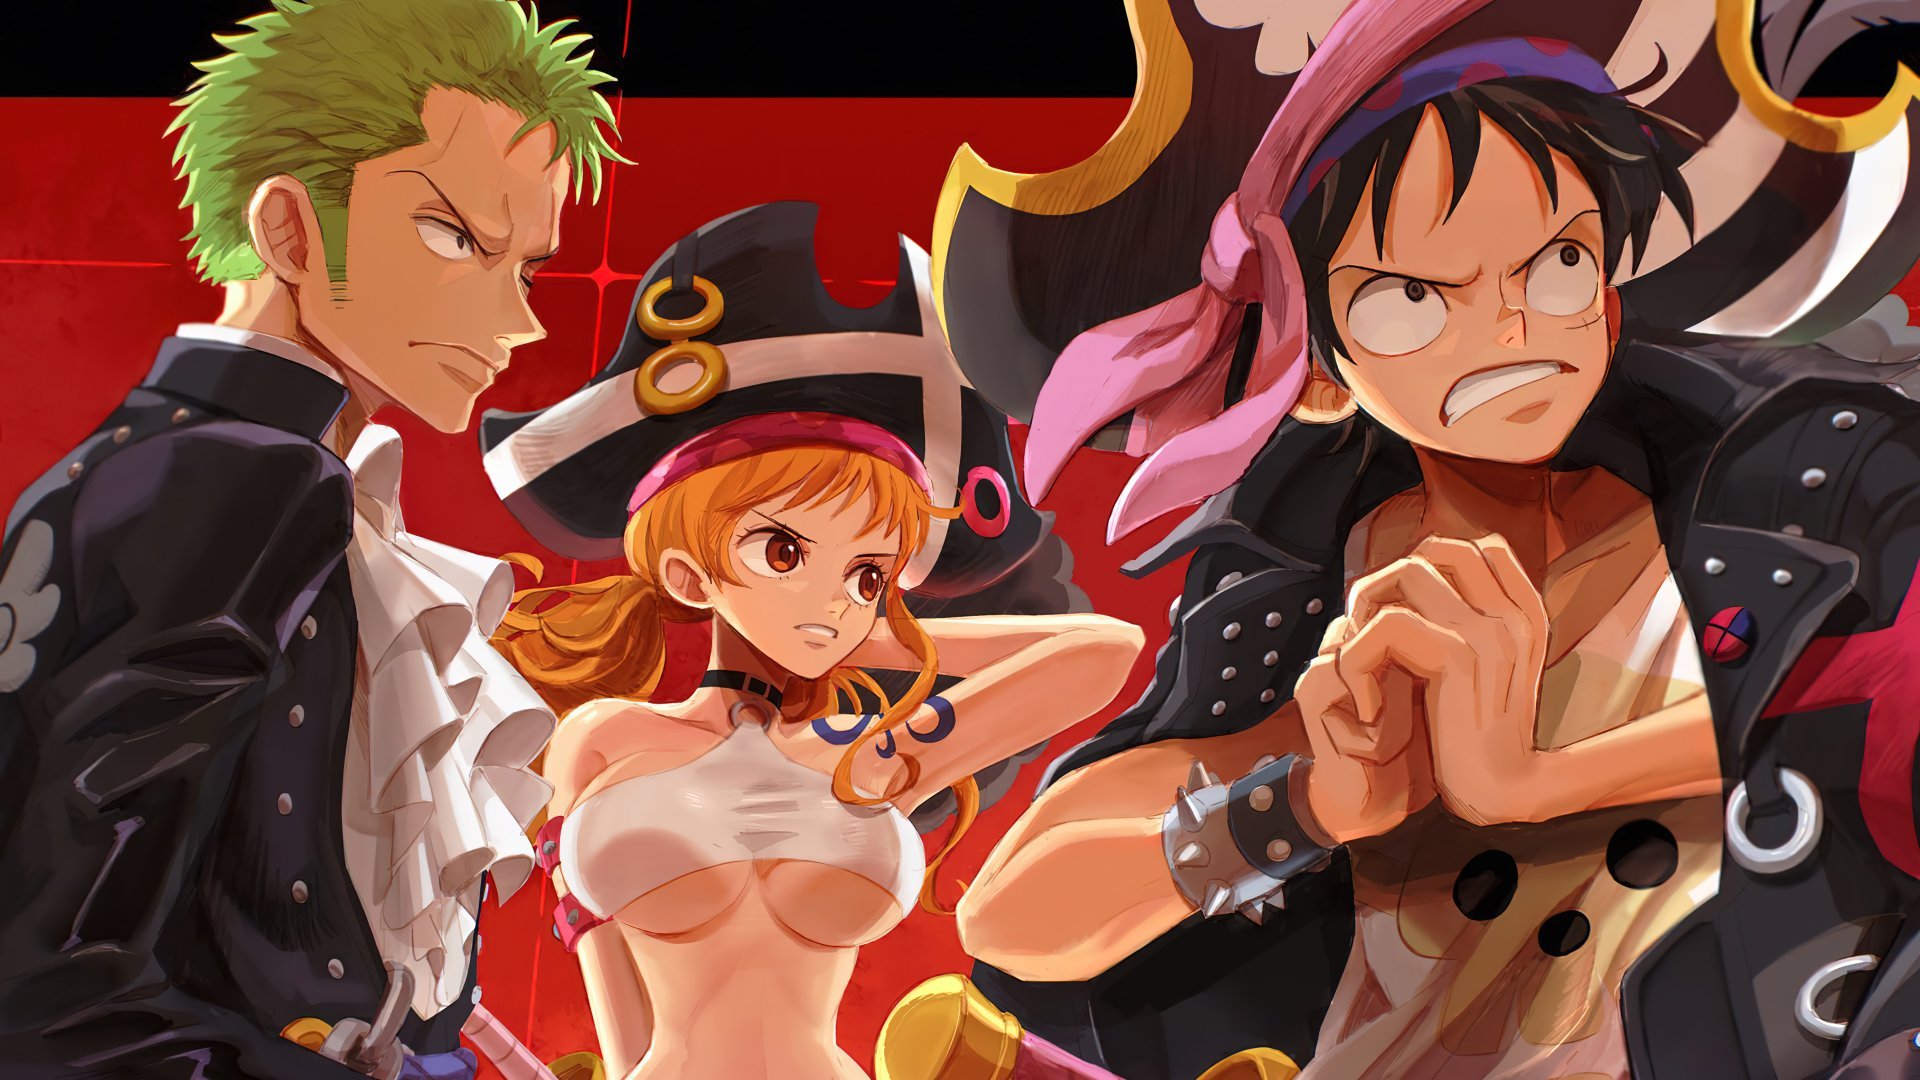 Download Super Franky One Piece Anime Wallpaper Hd Desktop Mobile  Franky Wallpaper  One Piece Iphone PNG Image with No Background  PNGkeycom